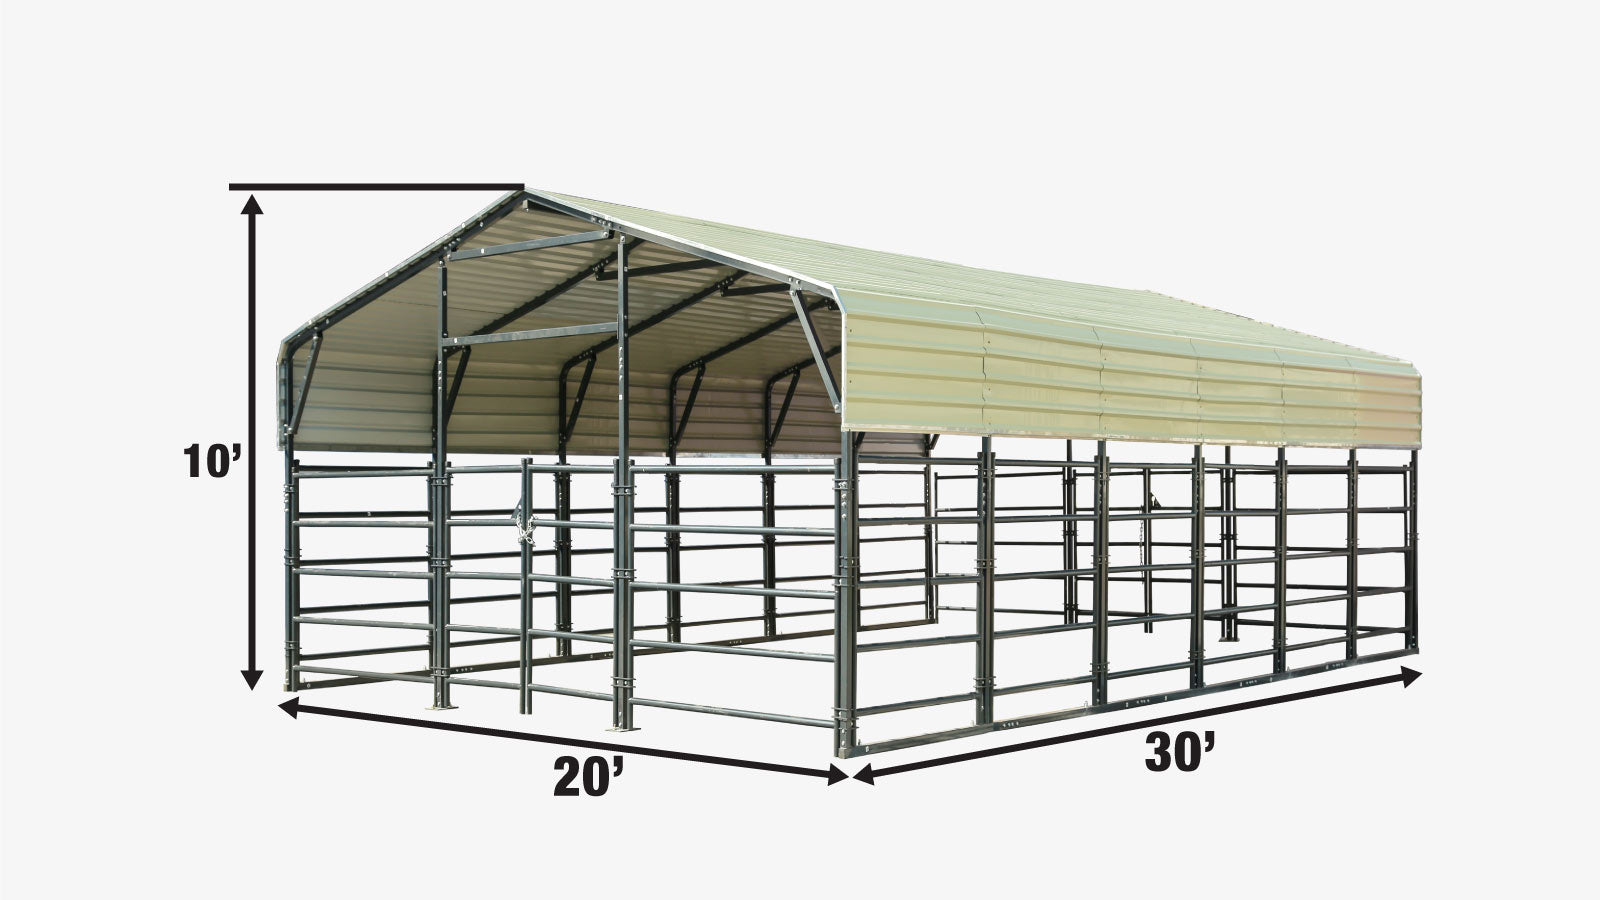 TMG Industrial 20' x 30' Bétail Corral Panel Metal Shed, 7' Sidewall Height, 5' Corral Panel Height, 600 Sq-Ft, 27 GA Corrugated Panels, TMG-MS2030LC-specifications-image